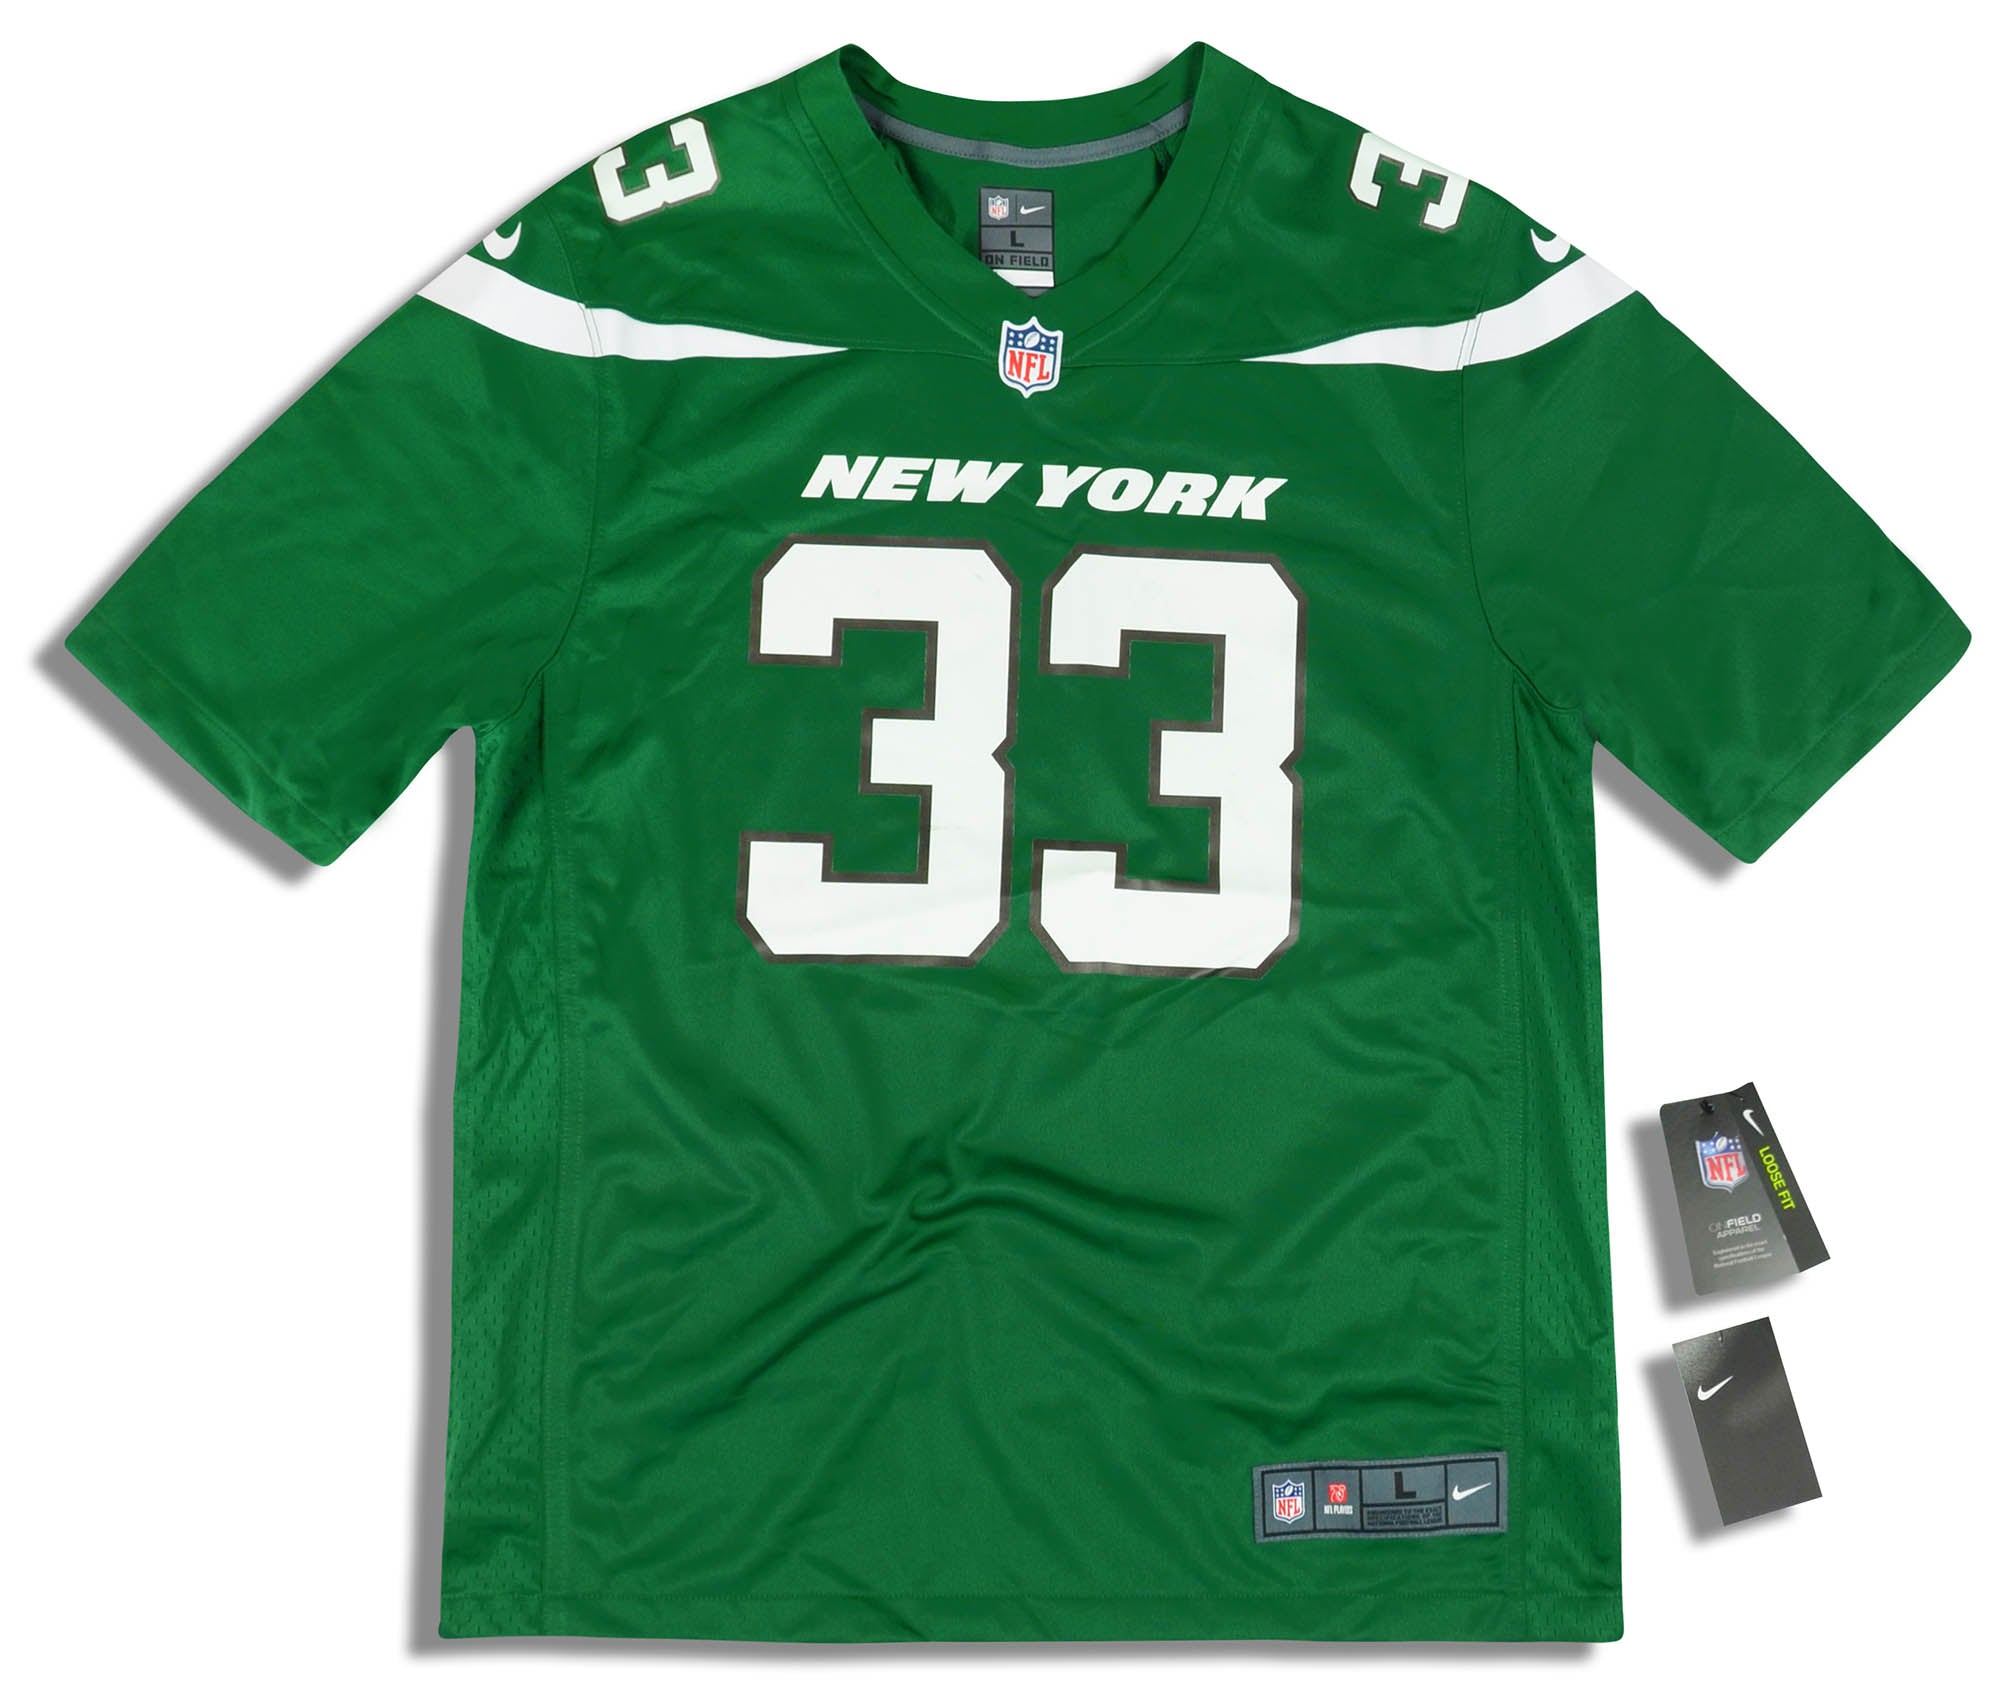 2019 NEW YORK JETS ADAMS #33 NIKE GAME JERSEY (HOME) L - W/TAGS